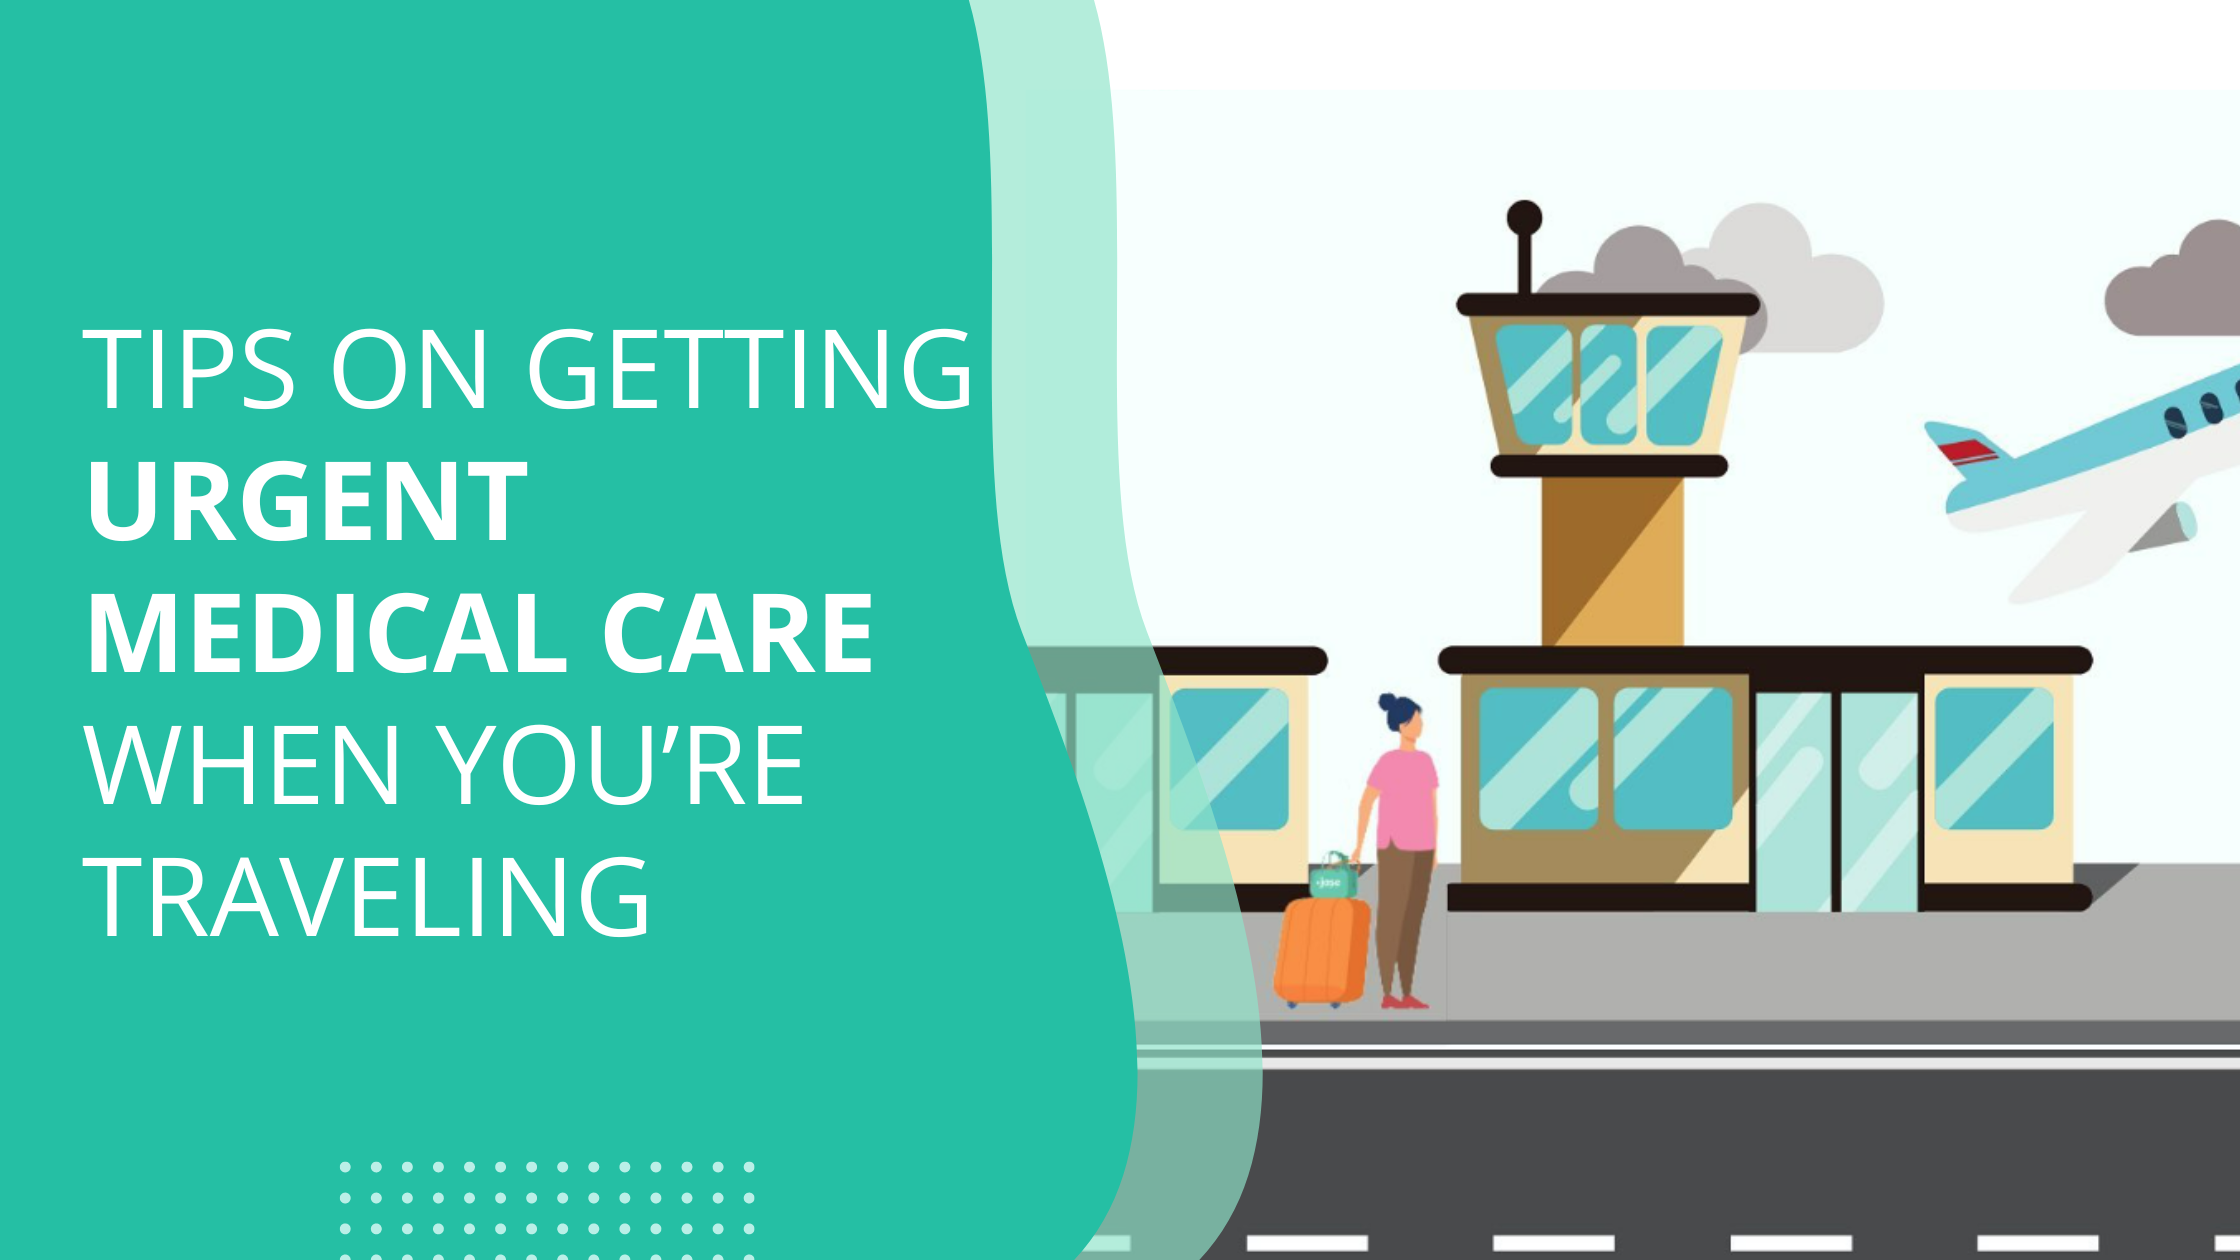 Tips on Getting Urgent Medical Care When You’re Traveling